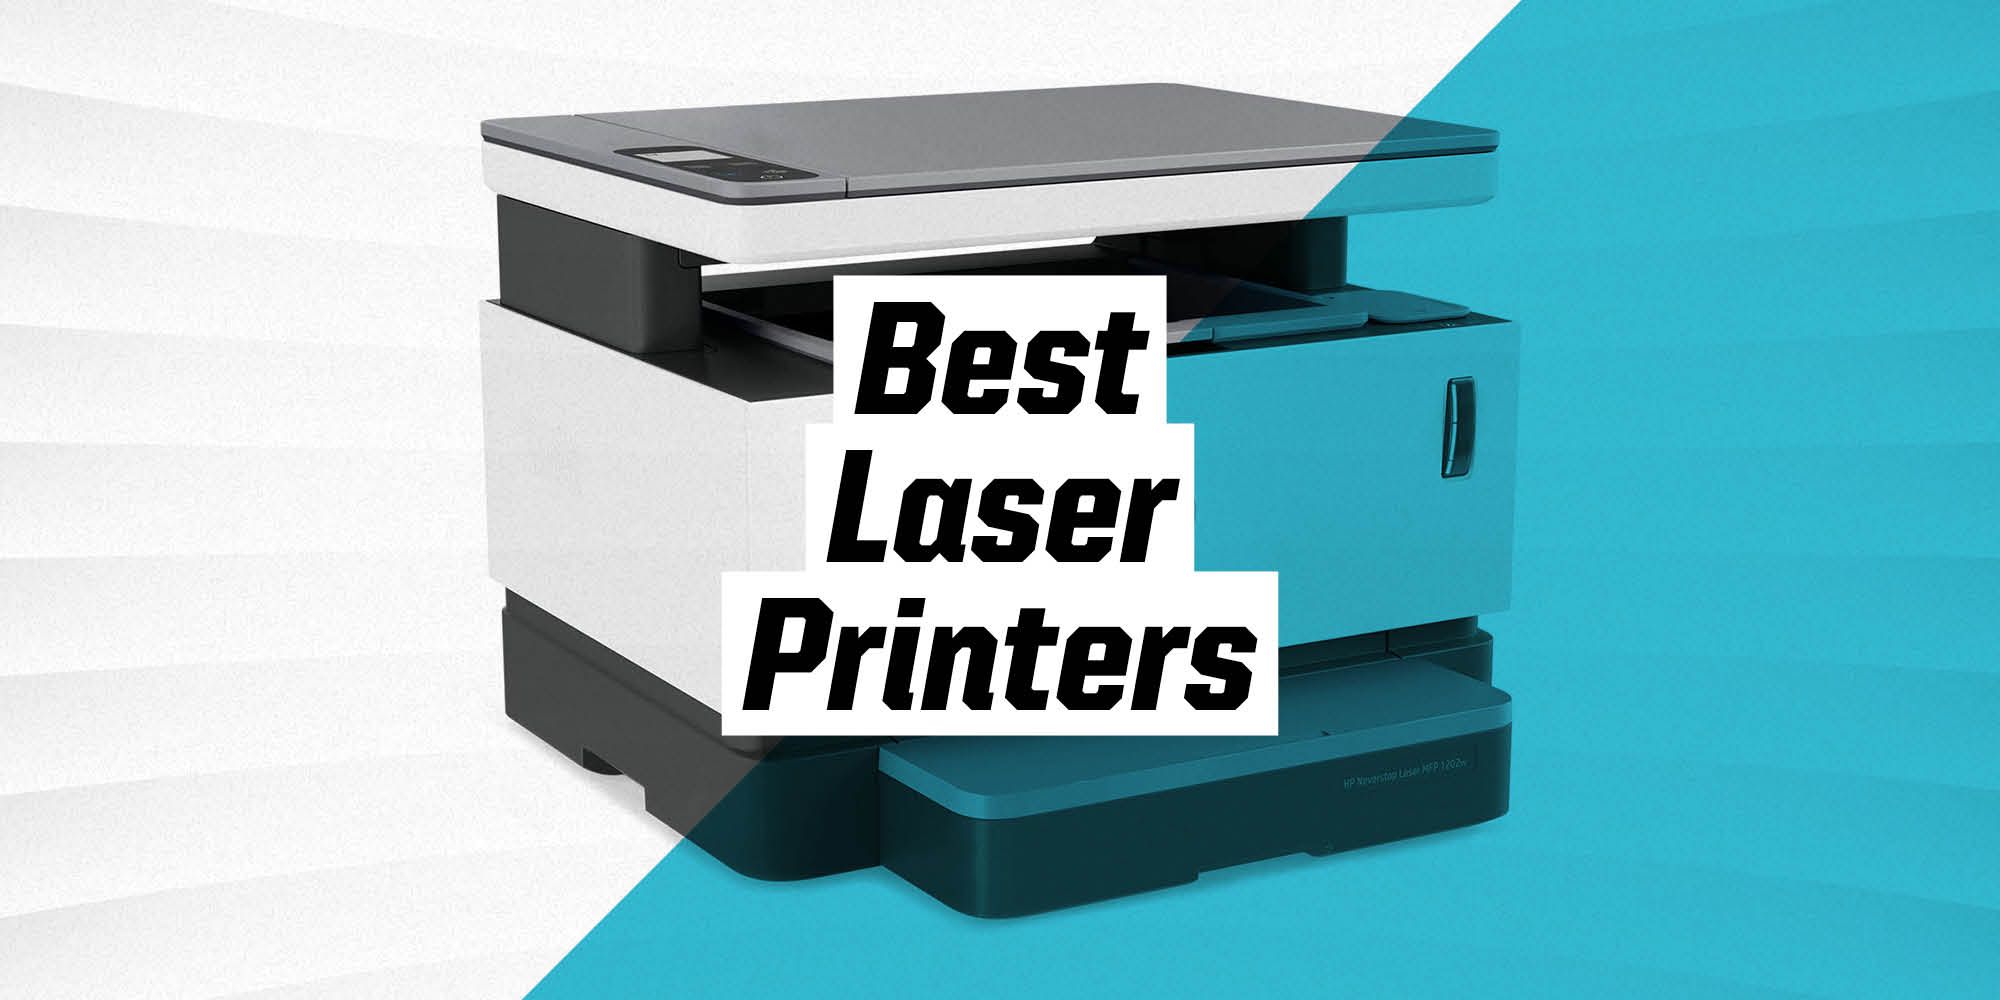 small color laser printer with scanner